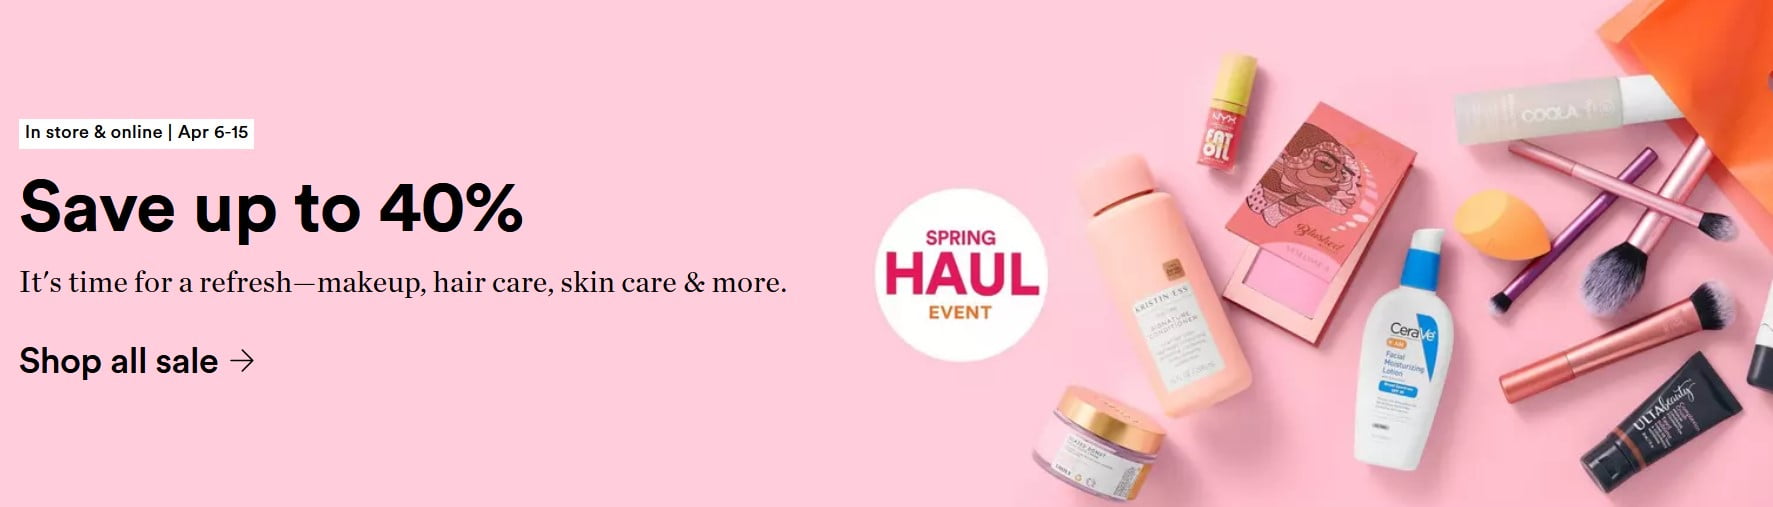 Save up to 40% of selected products at Ulta (US)